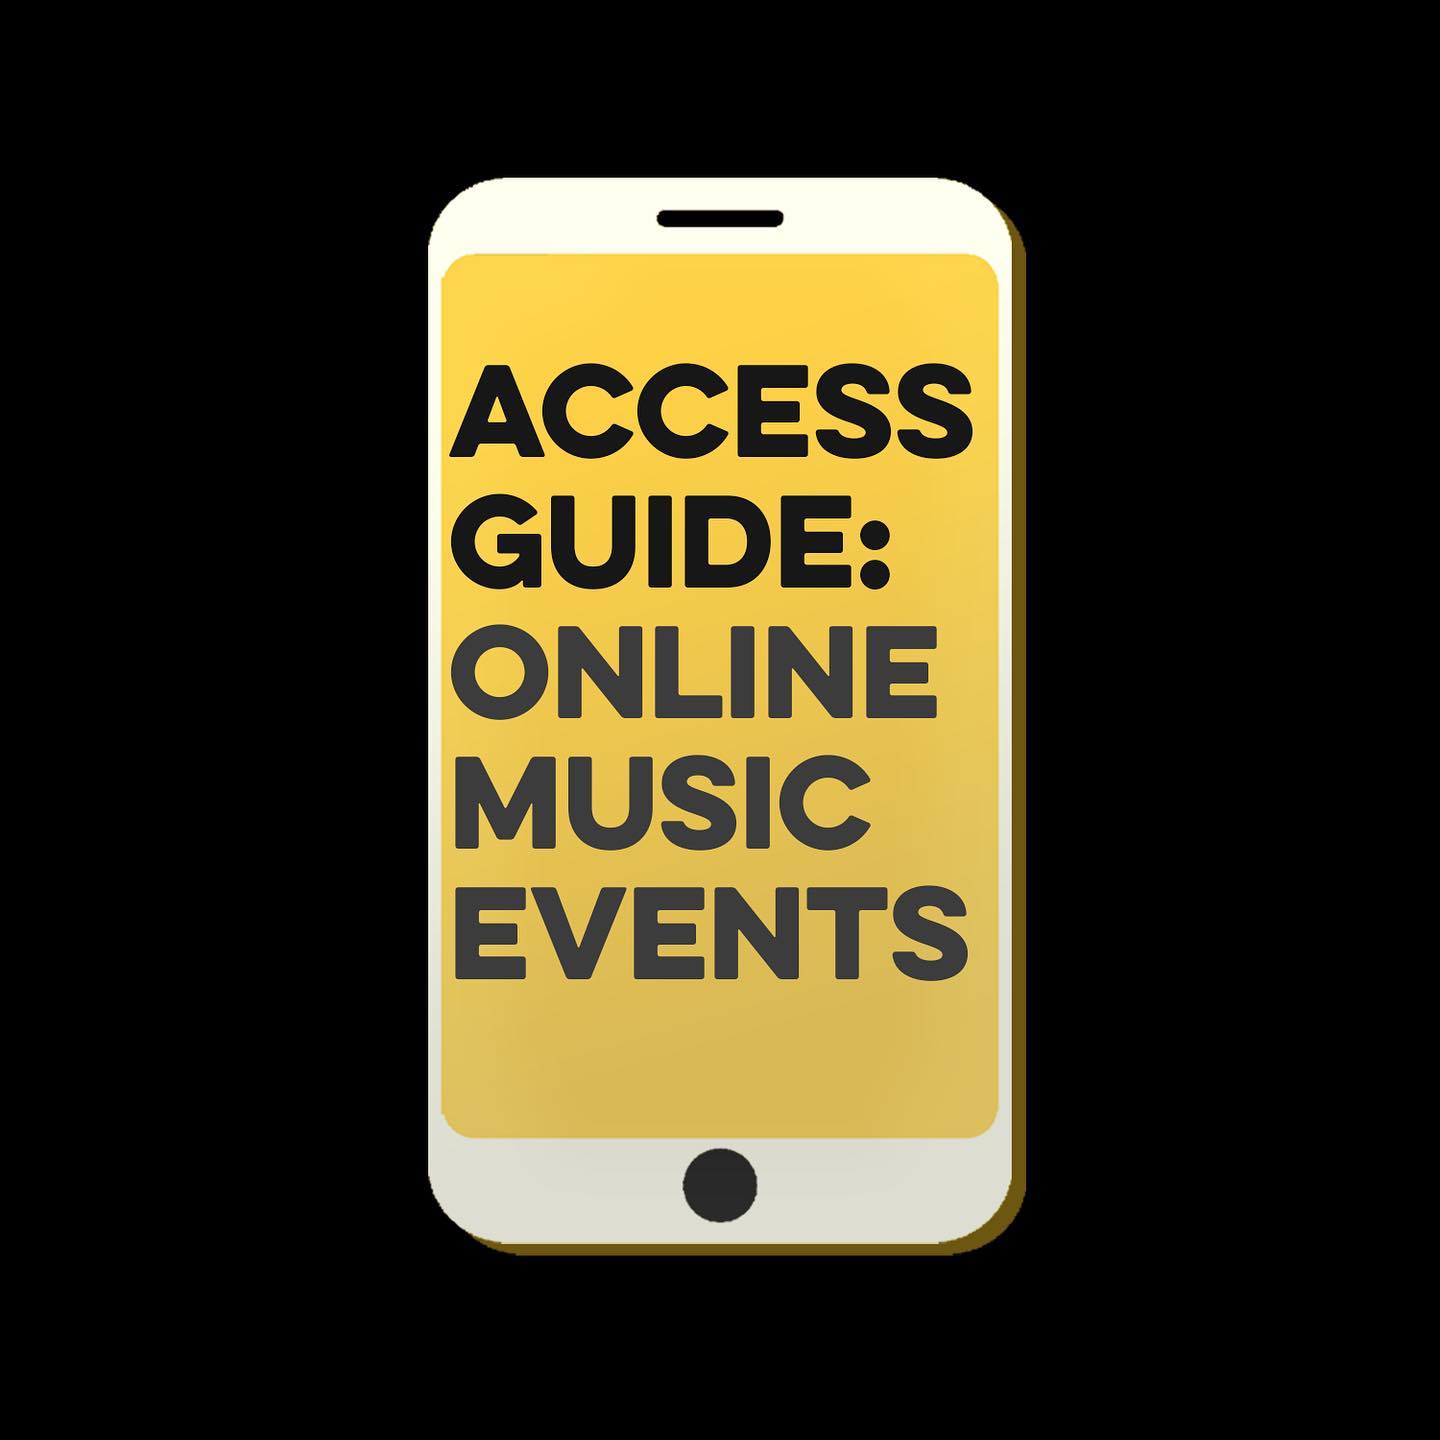 Access Guide: Online Music Events